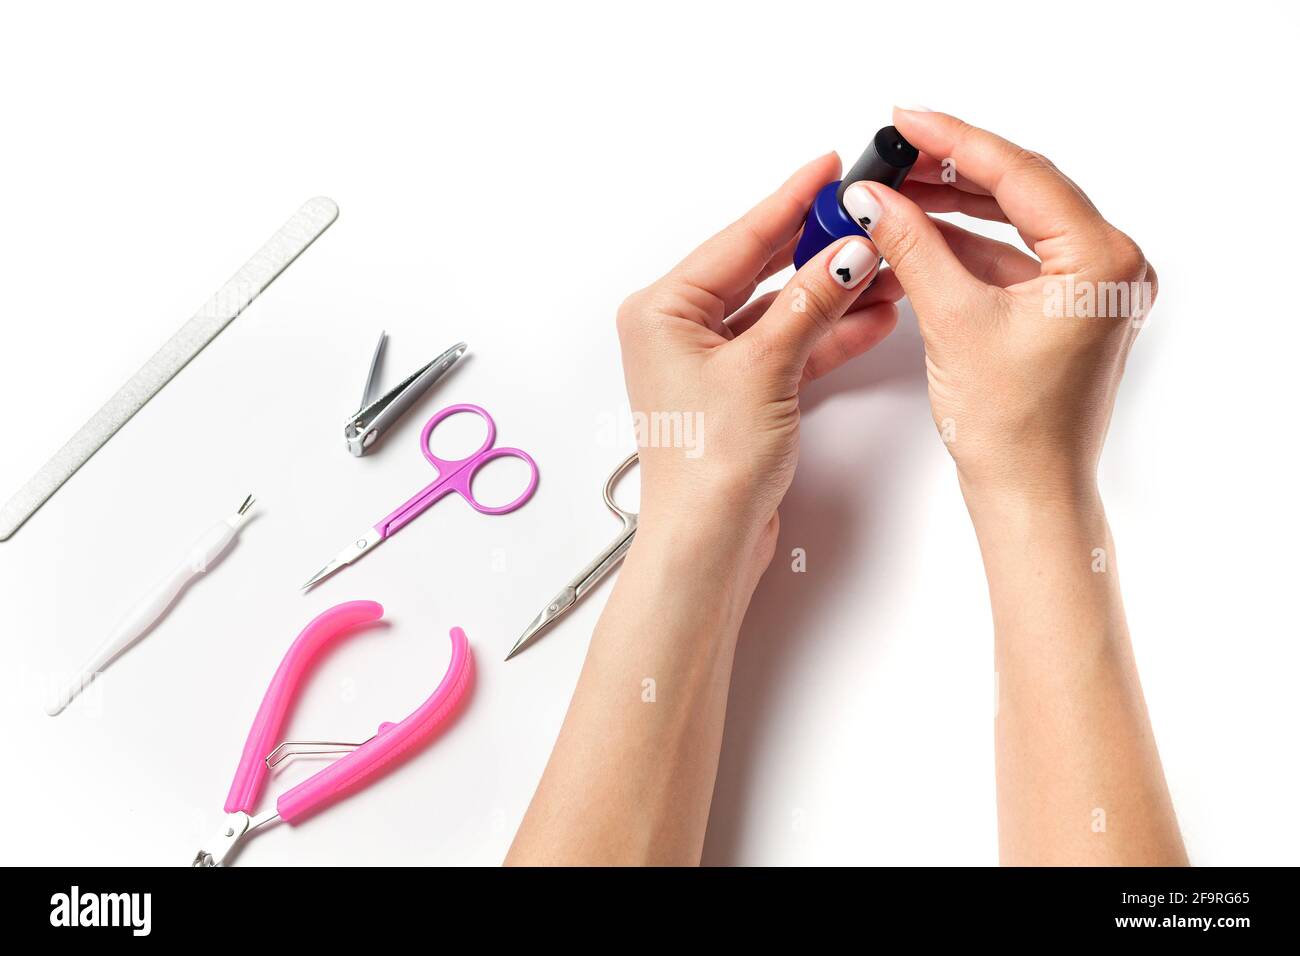 Female hands paint nails, next to lay down devices for nail care. The girl does a manicure. on white background. View from above.  Stock Photo